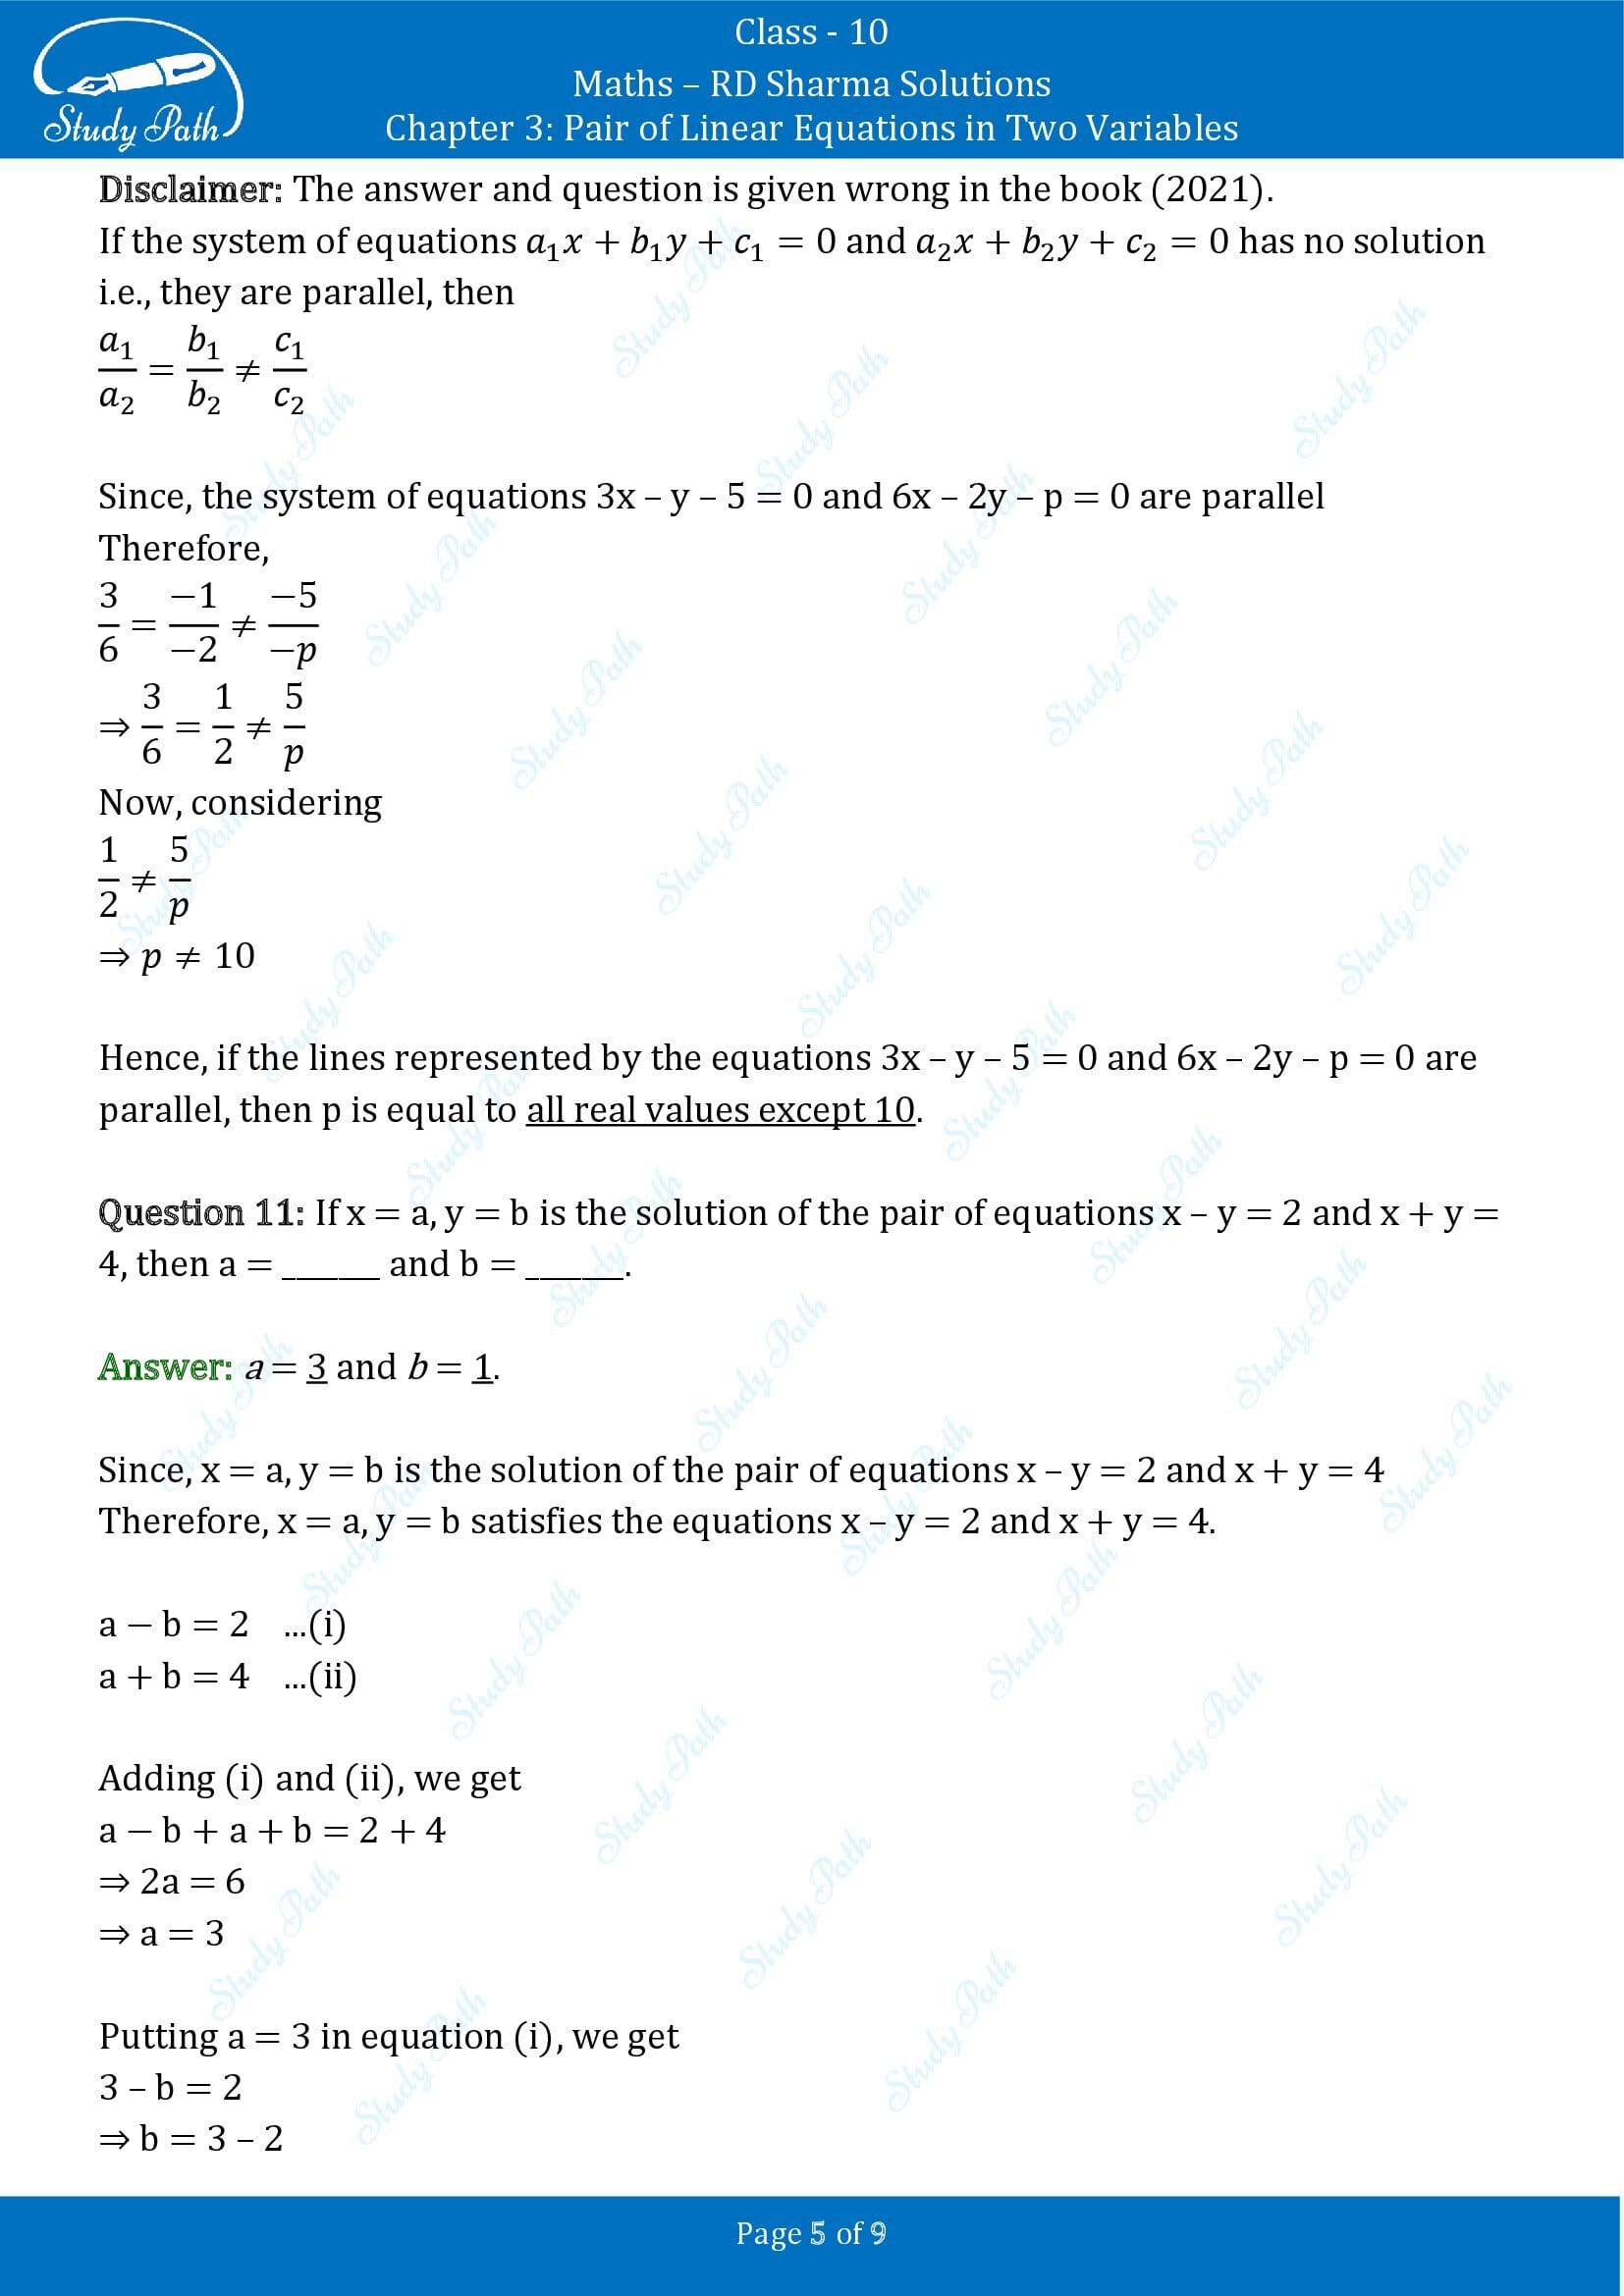 RD Sharma Solutions Class 10 Chapter 3 Pair of Linear Equations in Two Variables Exercise Fill in the Blank Type Questions FBQs 00005